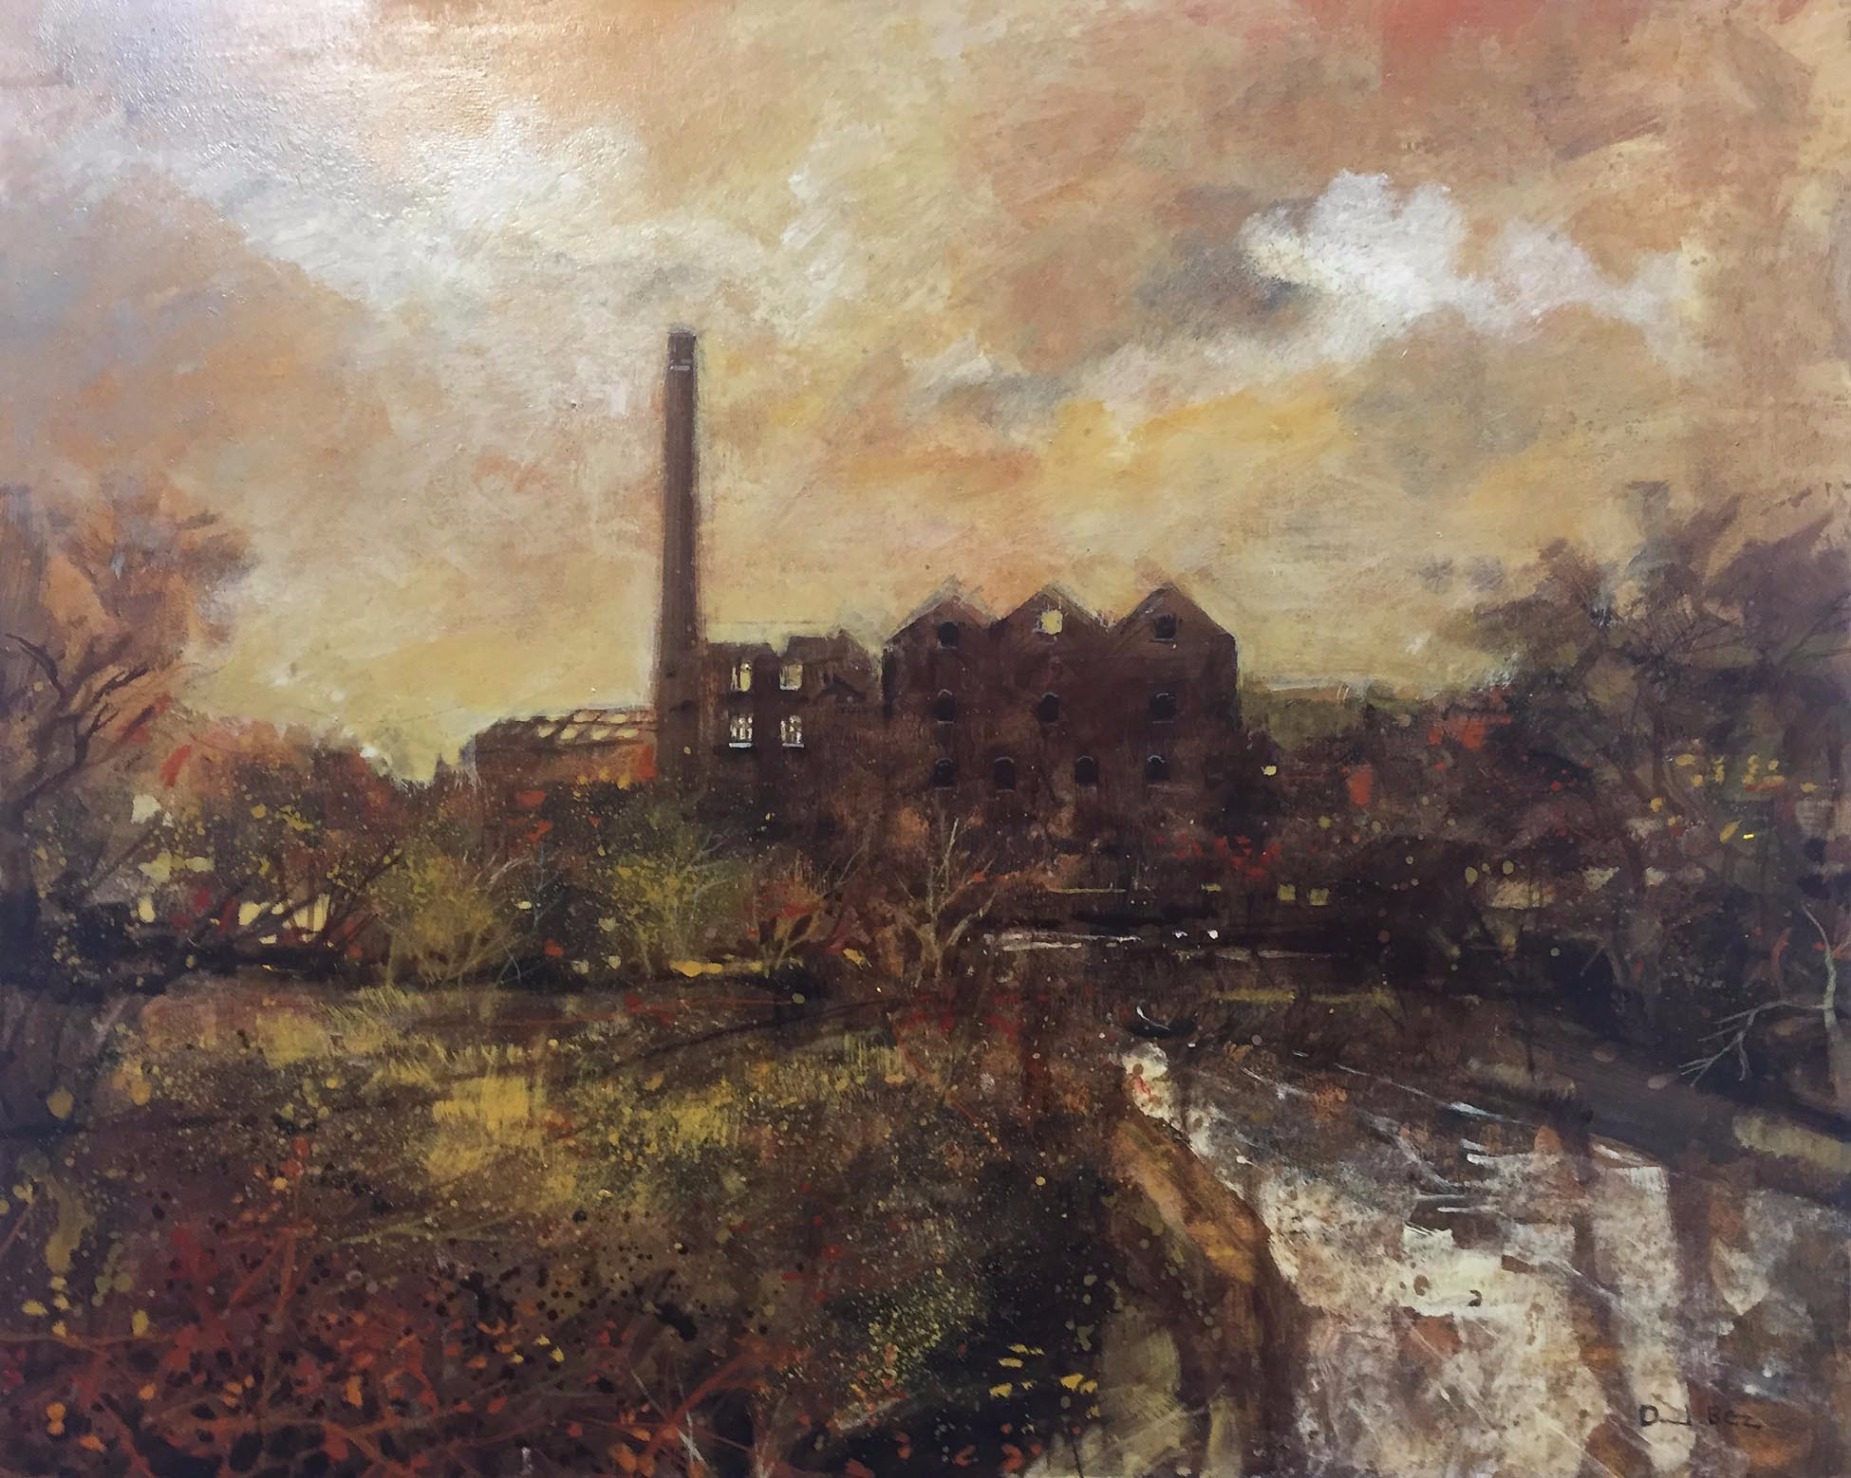 The Fall by David Bez, Northern | Nostalgic | Flowers | Industrial | Landscape